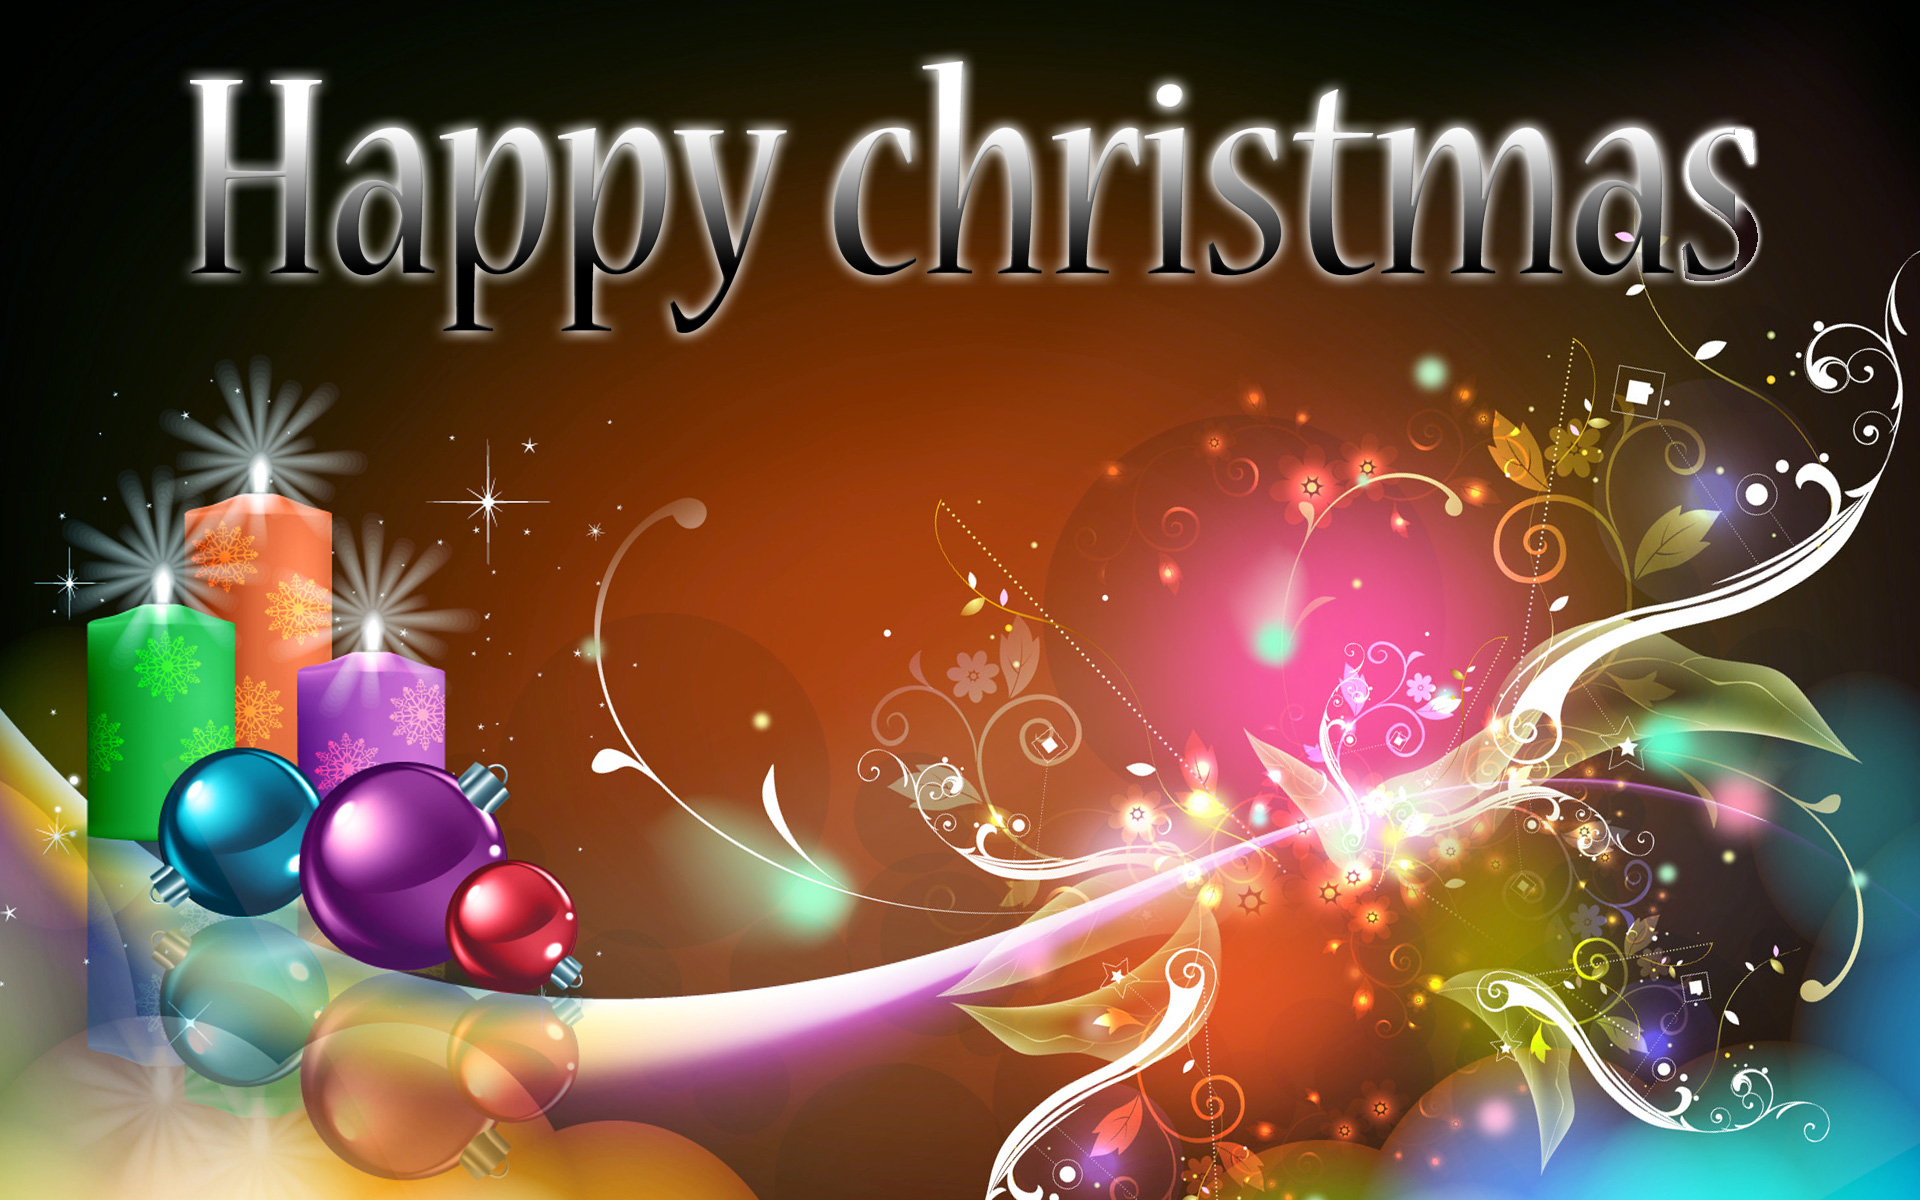 Merry Christmas HD Gorgeous Wallpaper Gallery